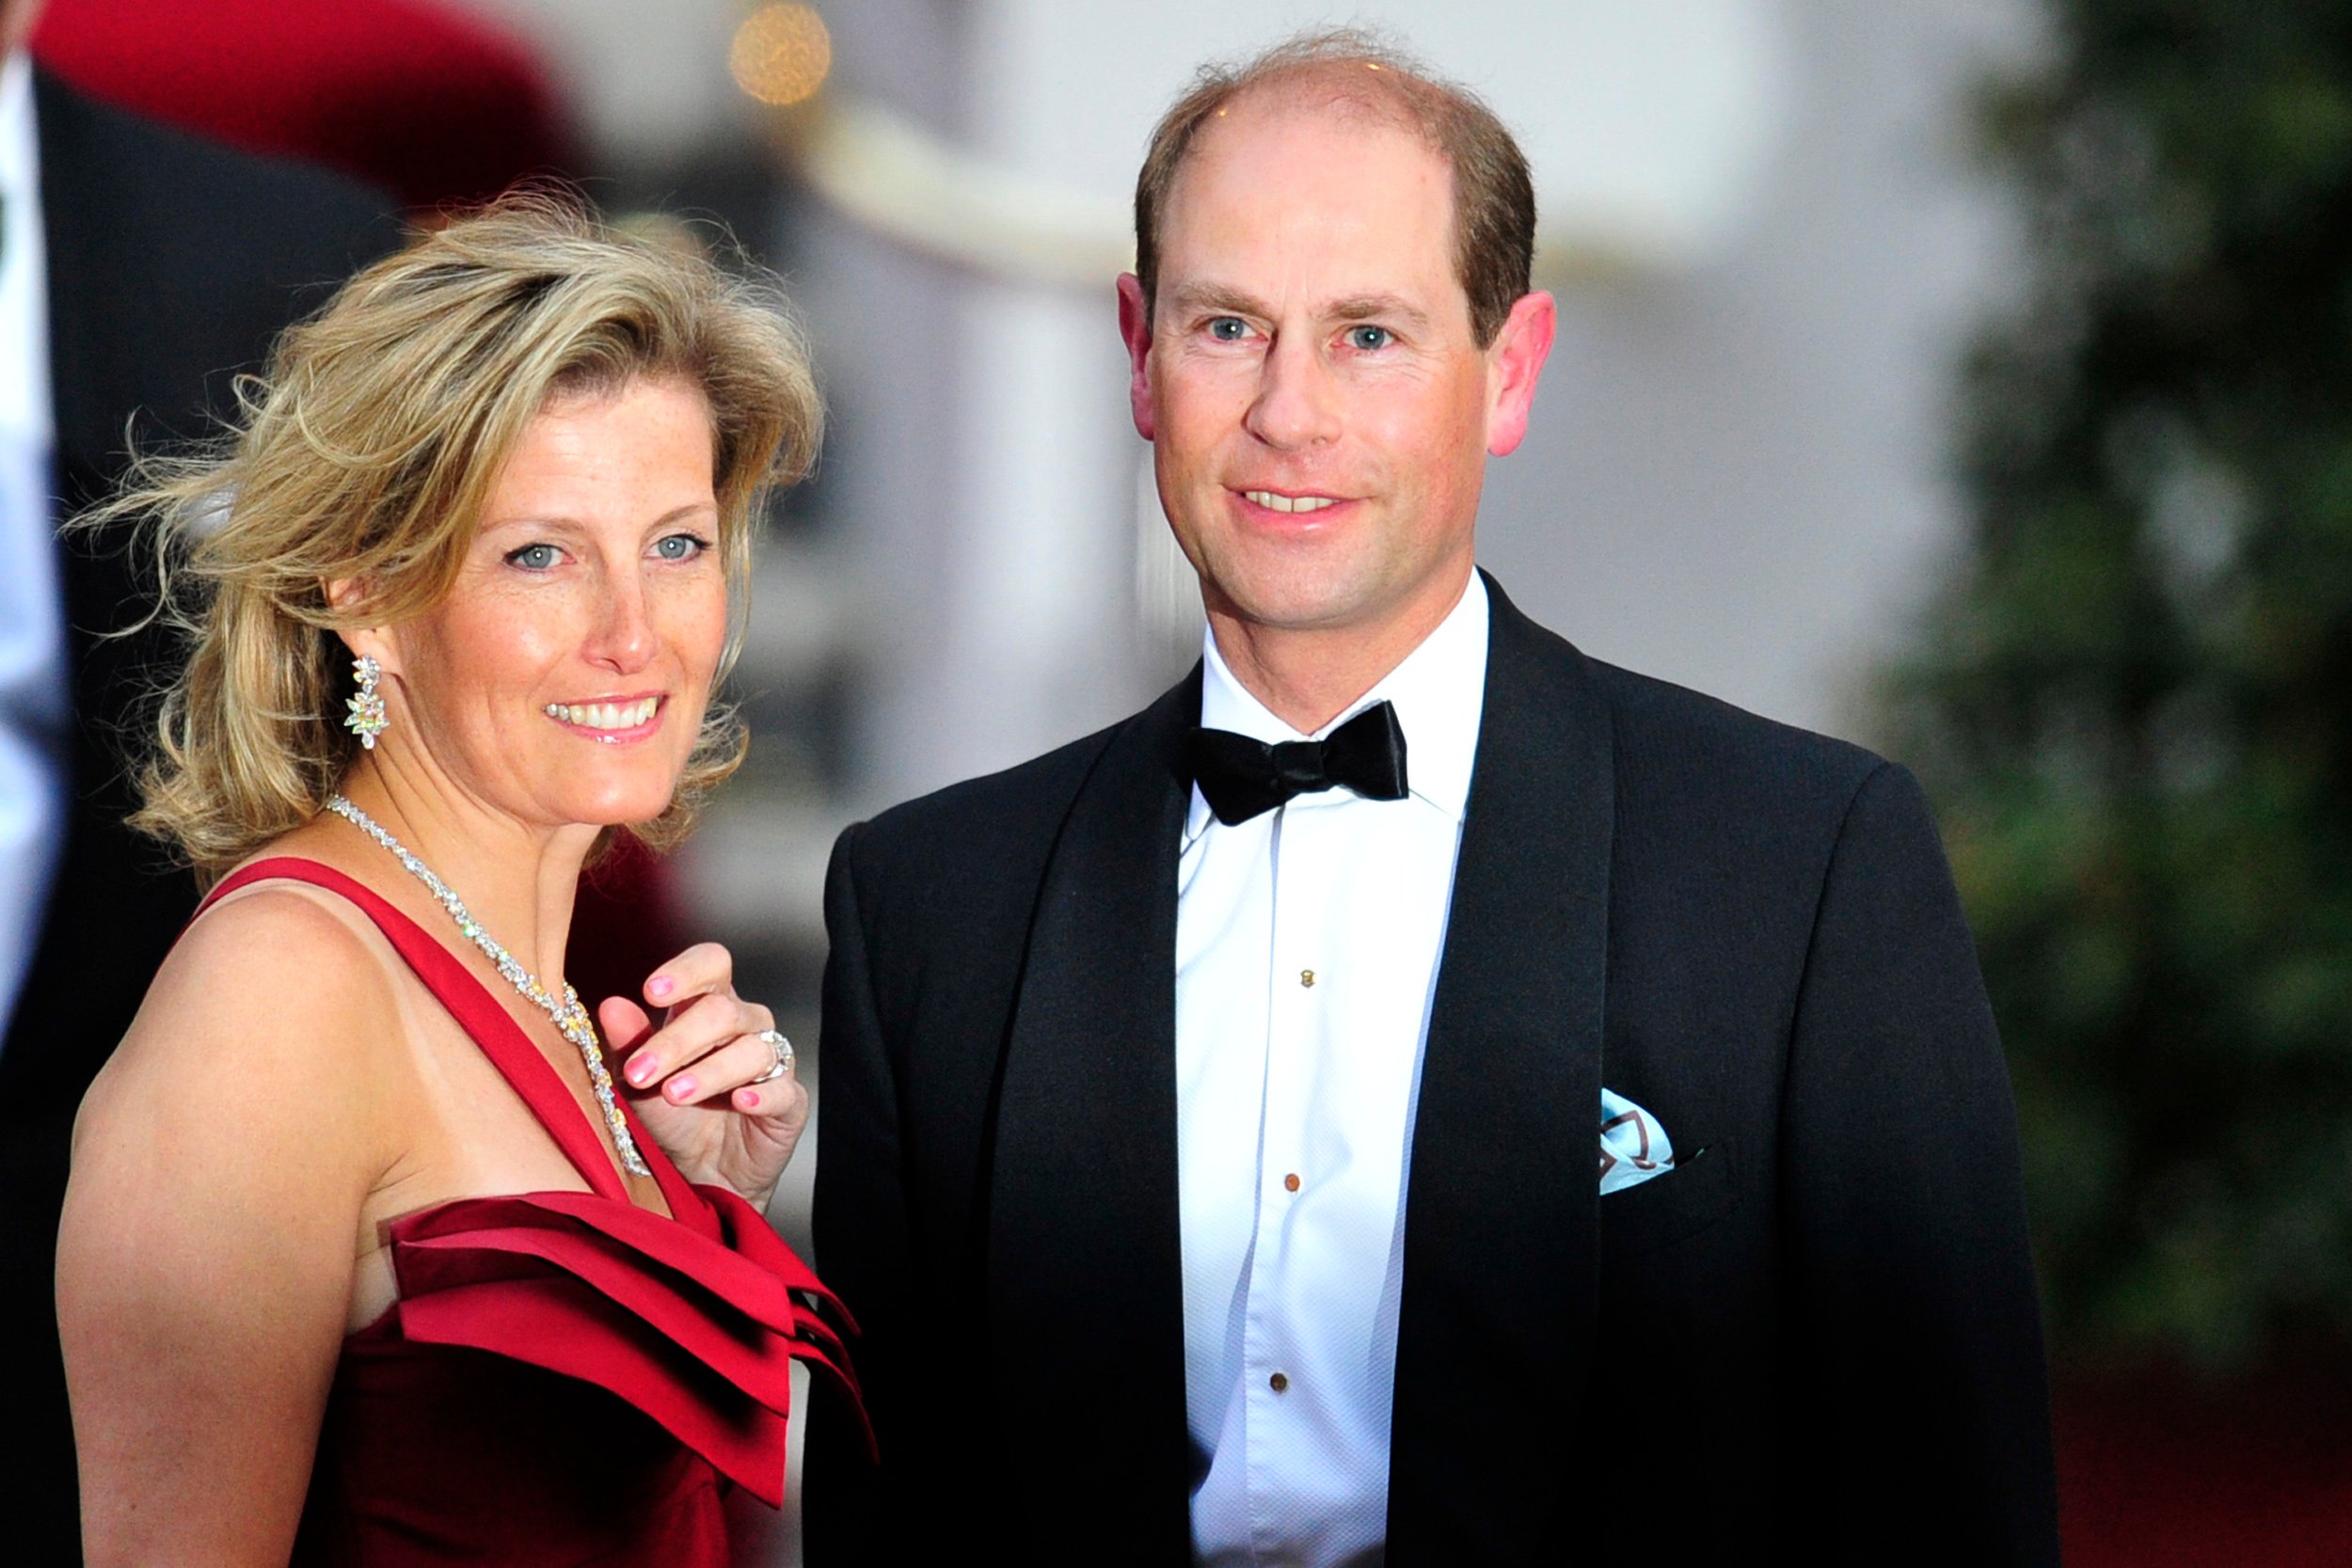 Prince Edward in a tuxedo and Sophie Wessex in a red gown at the Mandarin Oriental hotel for a gala dinner.